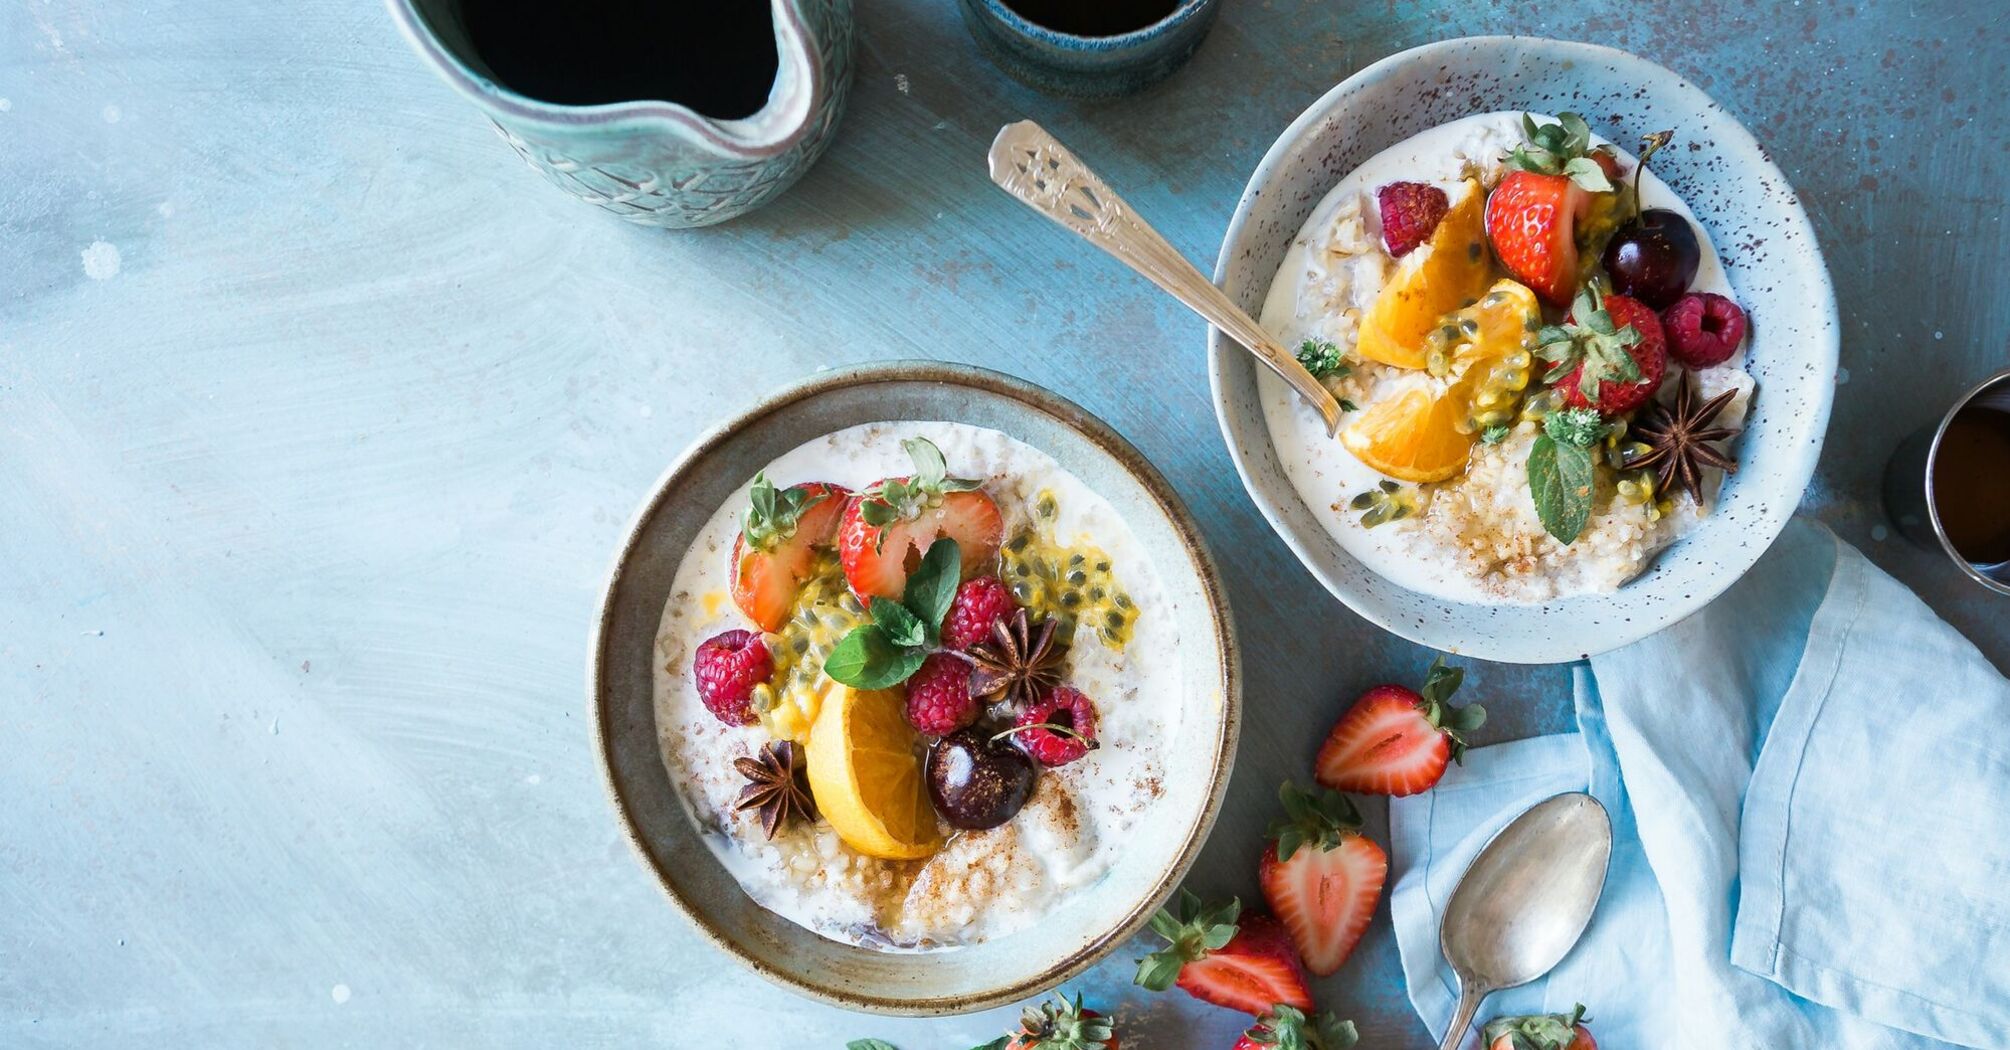 A vibrant breakfast spread featuring overnight oats topped with fresh strawberries